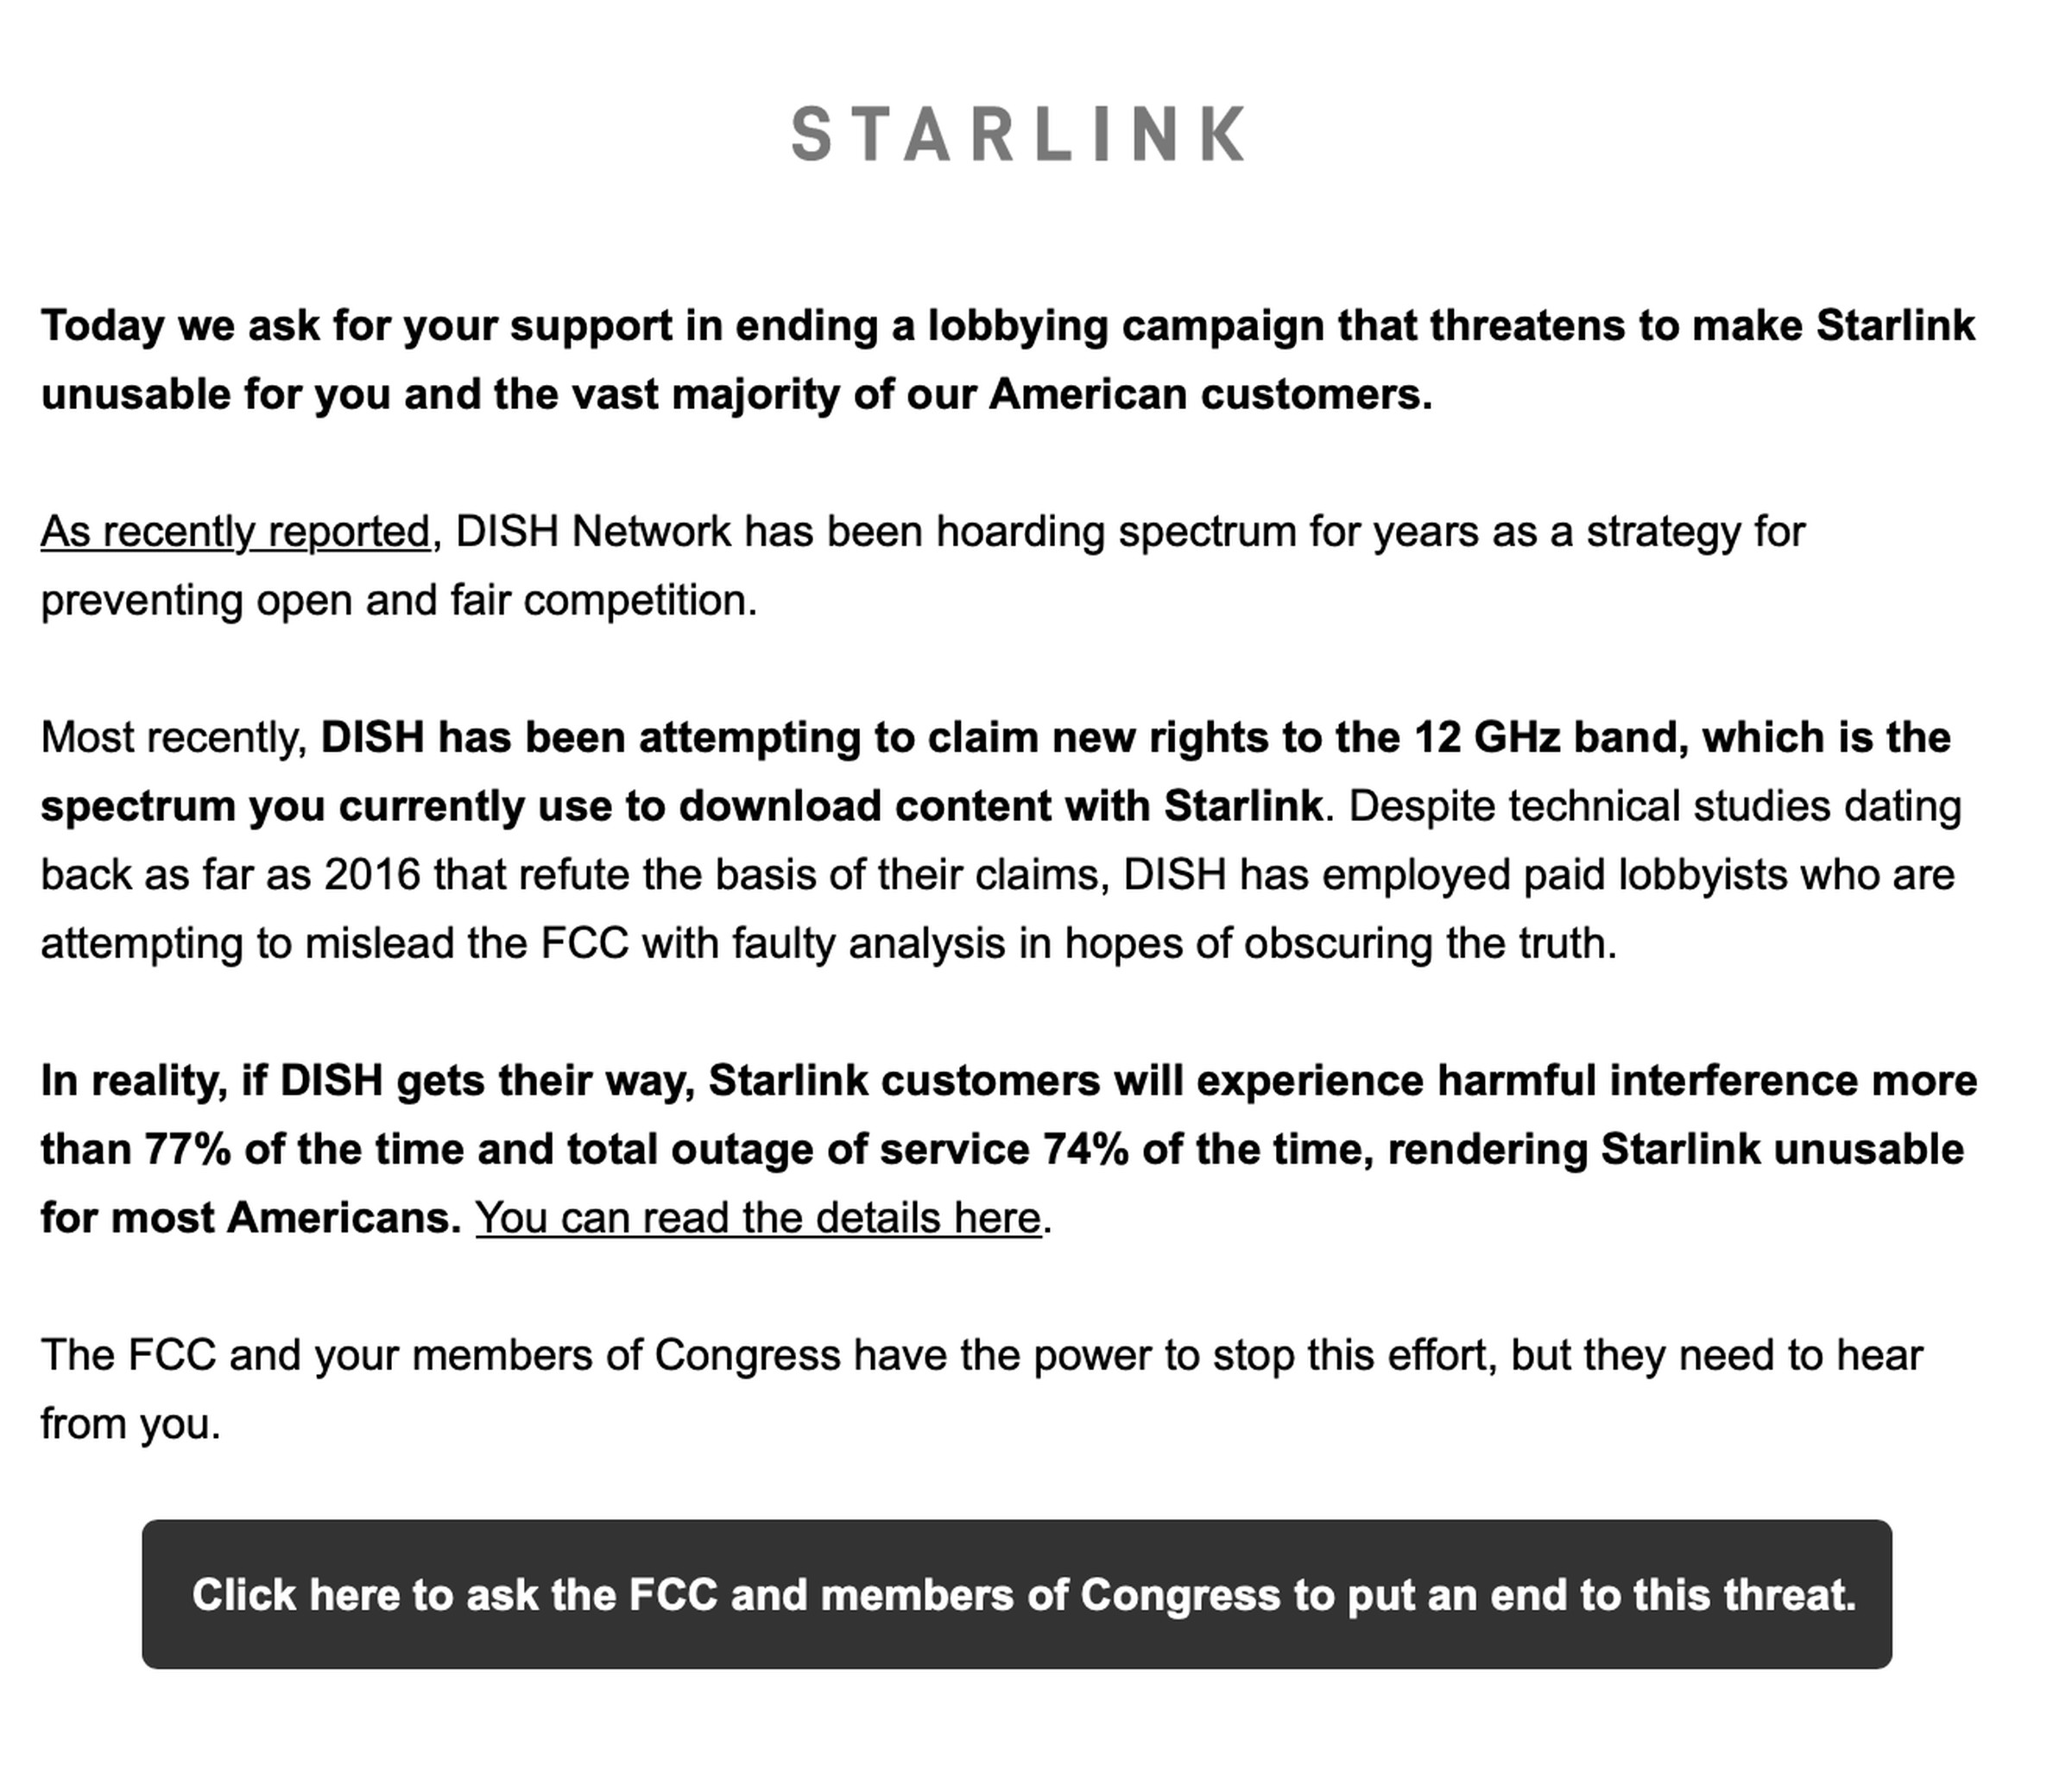 The email sent to Starlink users.